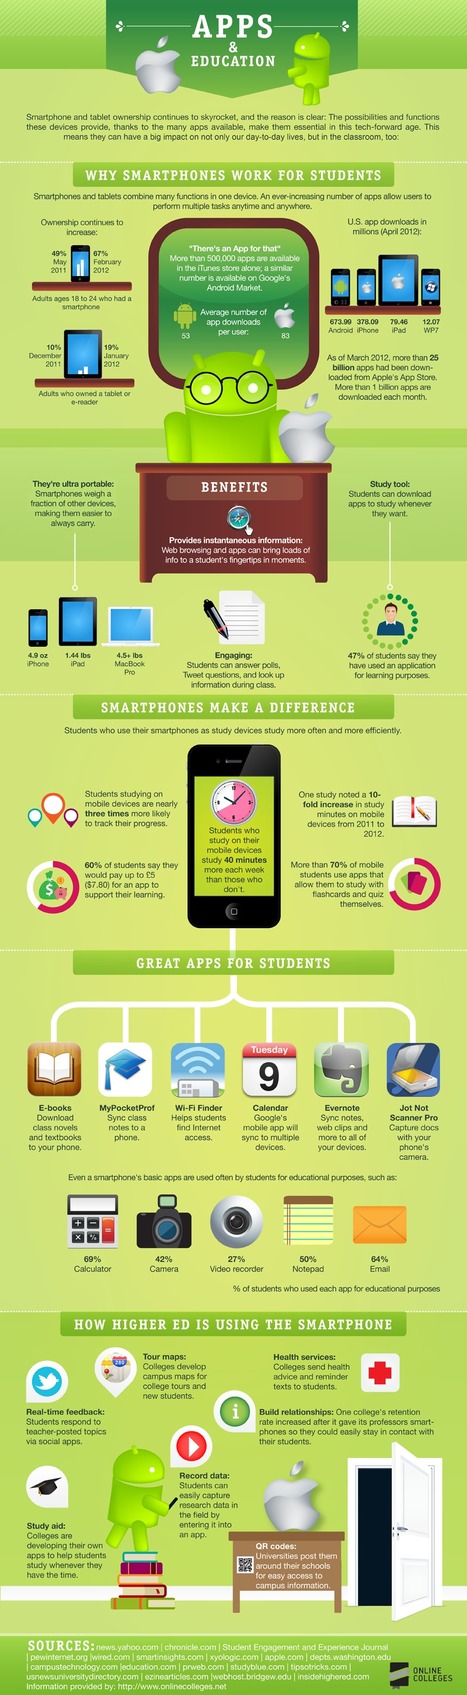 Trends | Infographic: Apps and Education | 21st Century Learning and Teaching | Scoop.it